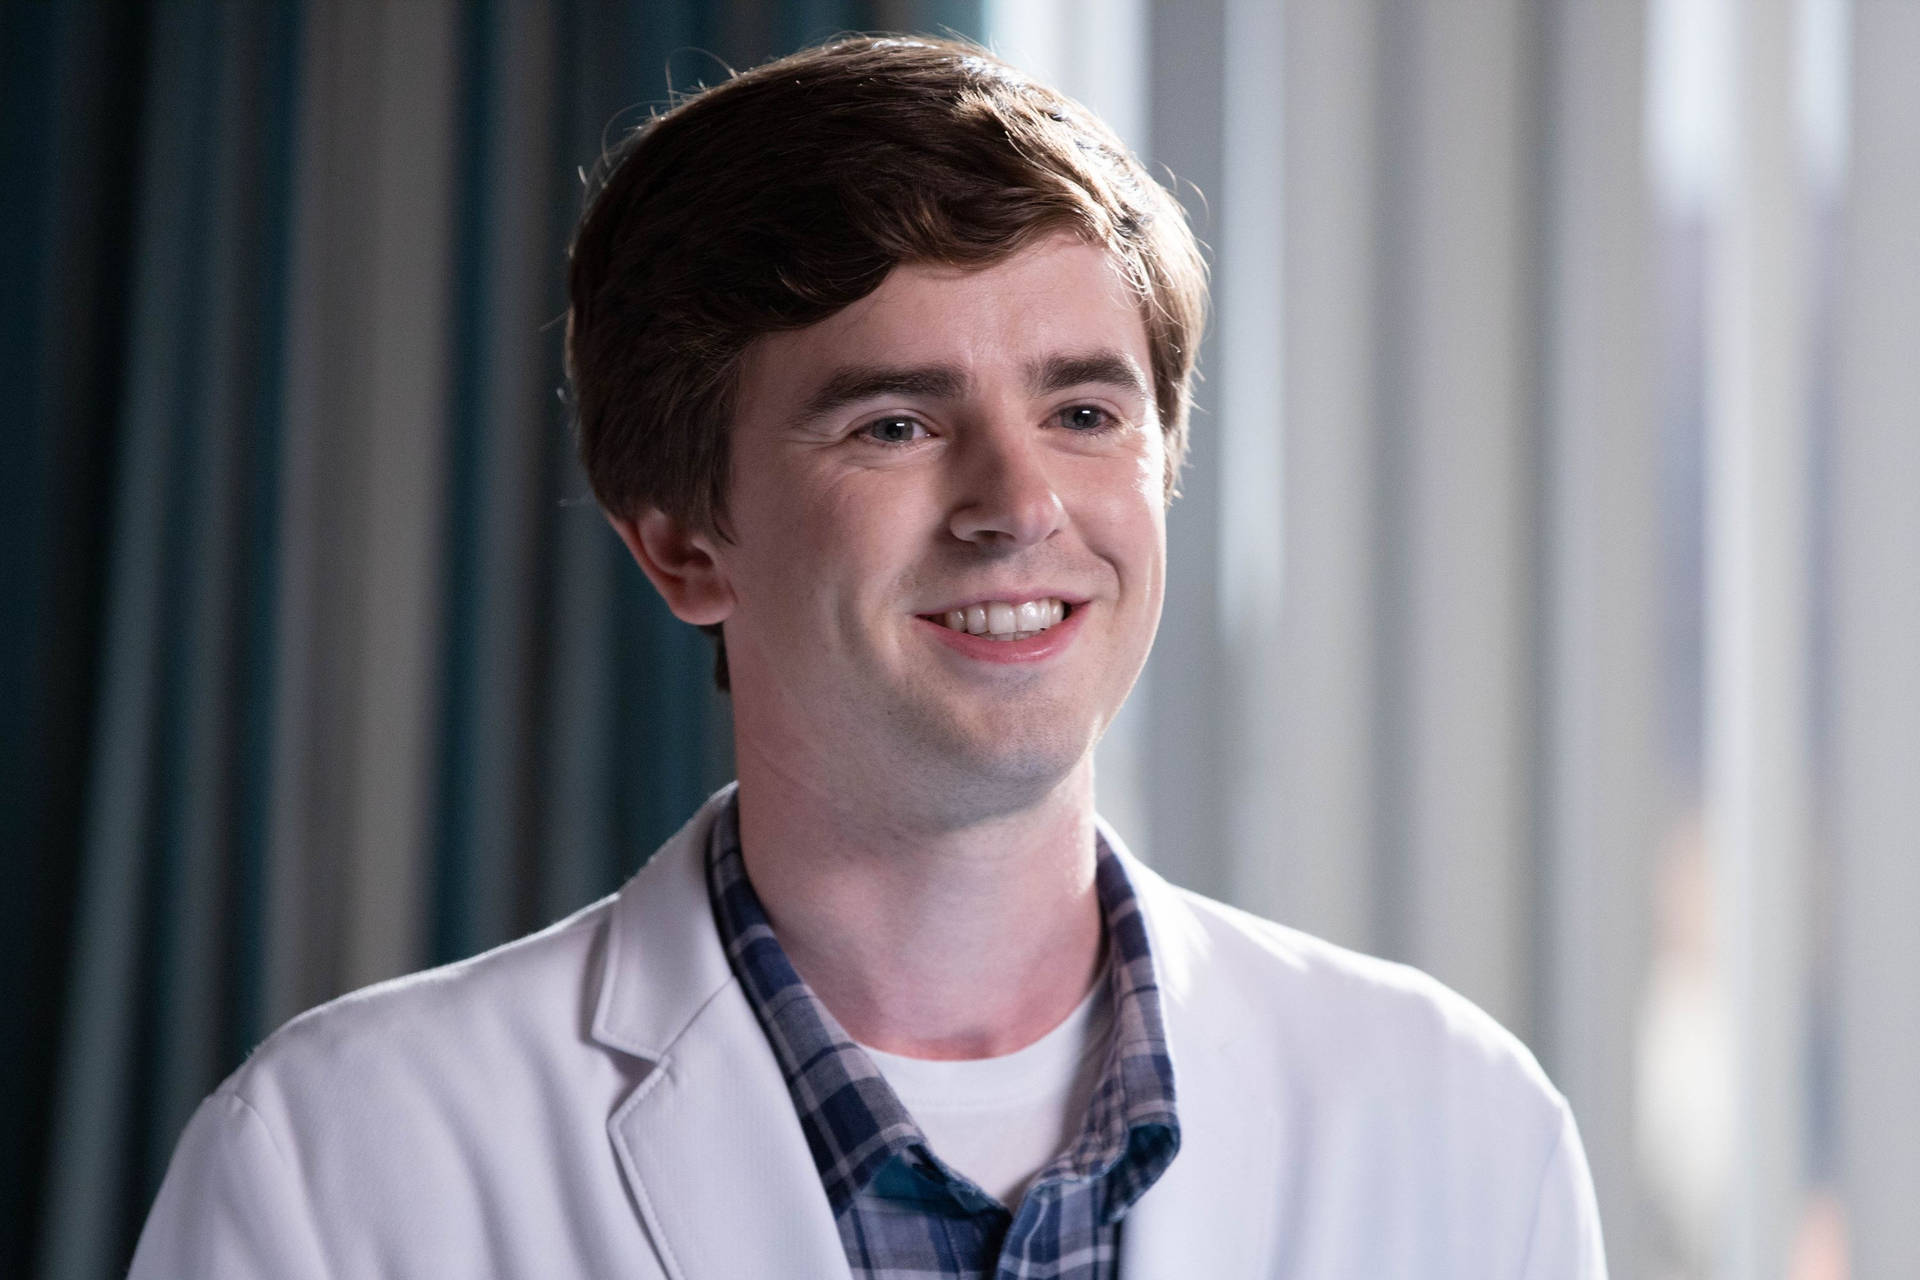 The Good Doctor Charming Smile Background